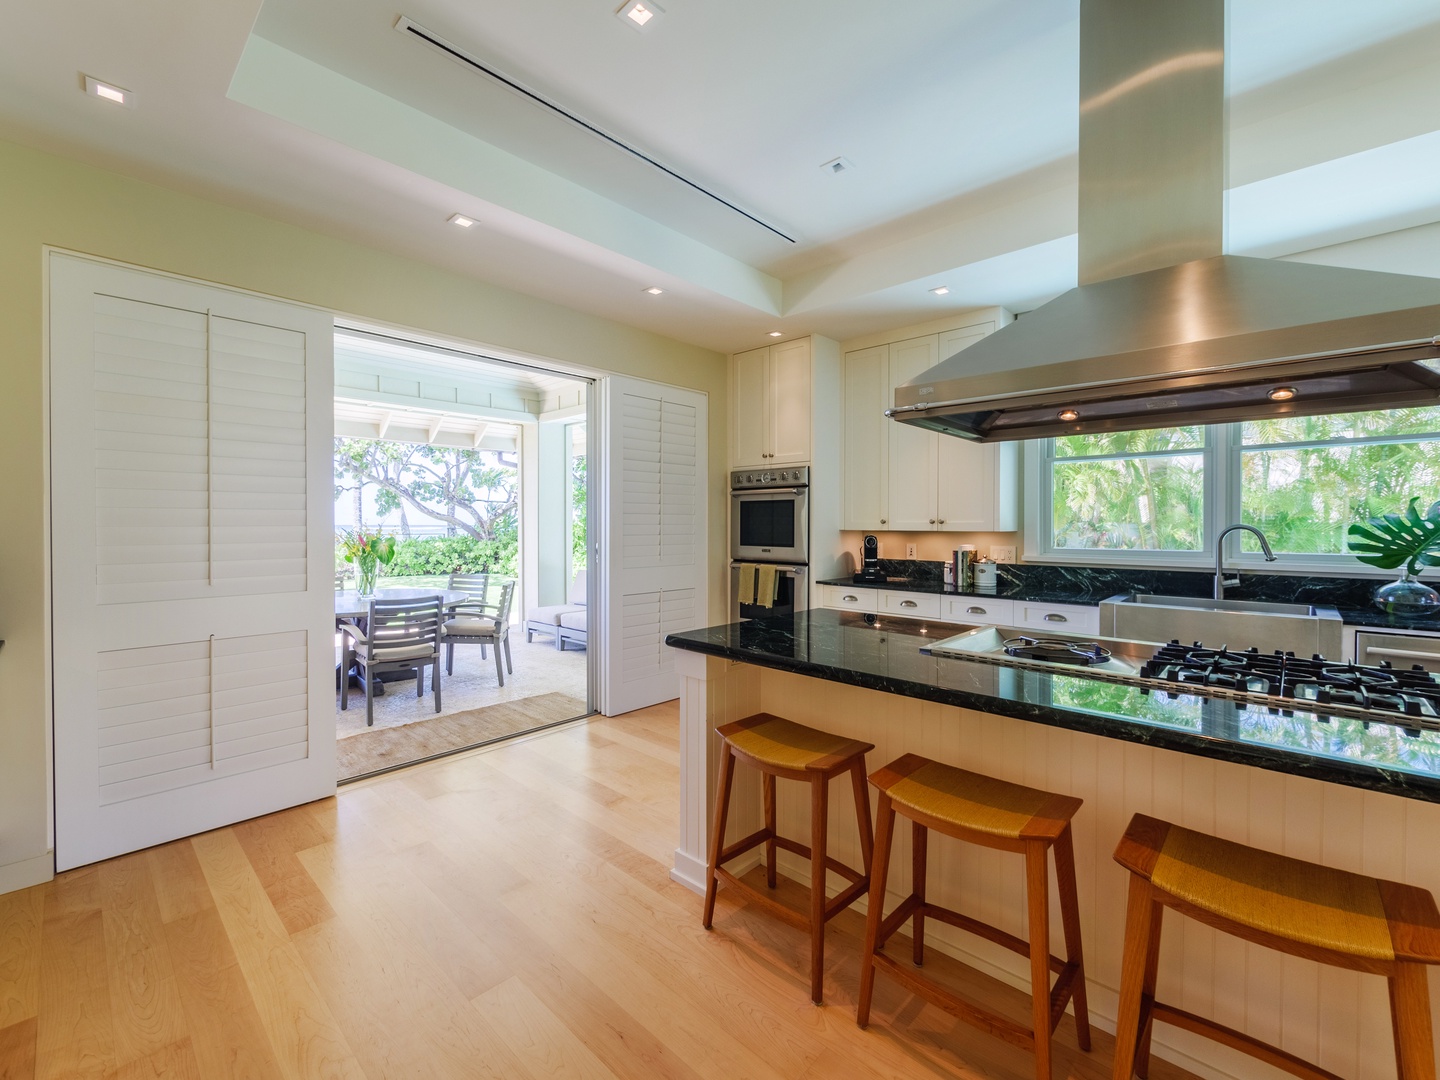 Honolulu Vacation Rentals, Paradise Beach Estate - From kitchen to patio in just a few steps: enjoy effortless al fresco dining options amidst fresh air and open skies.